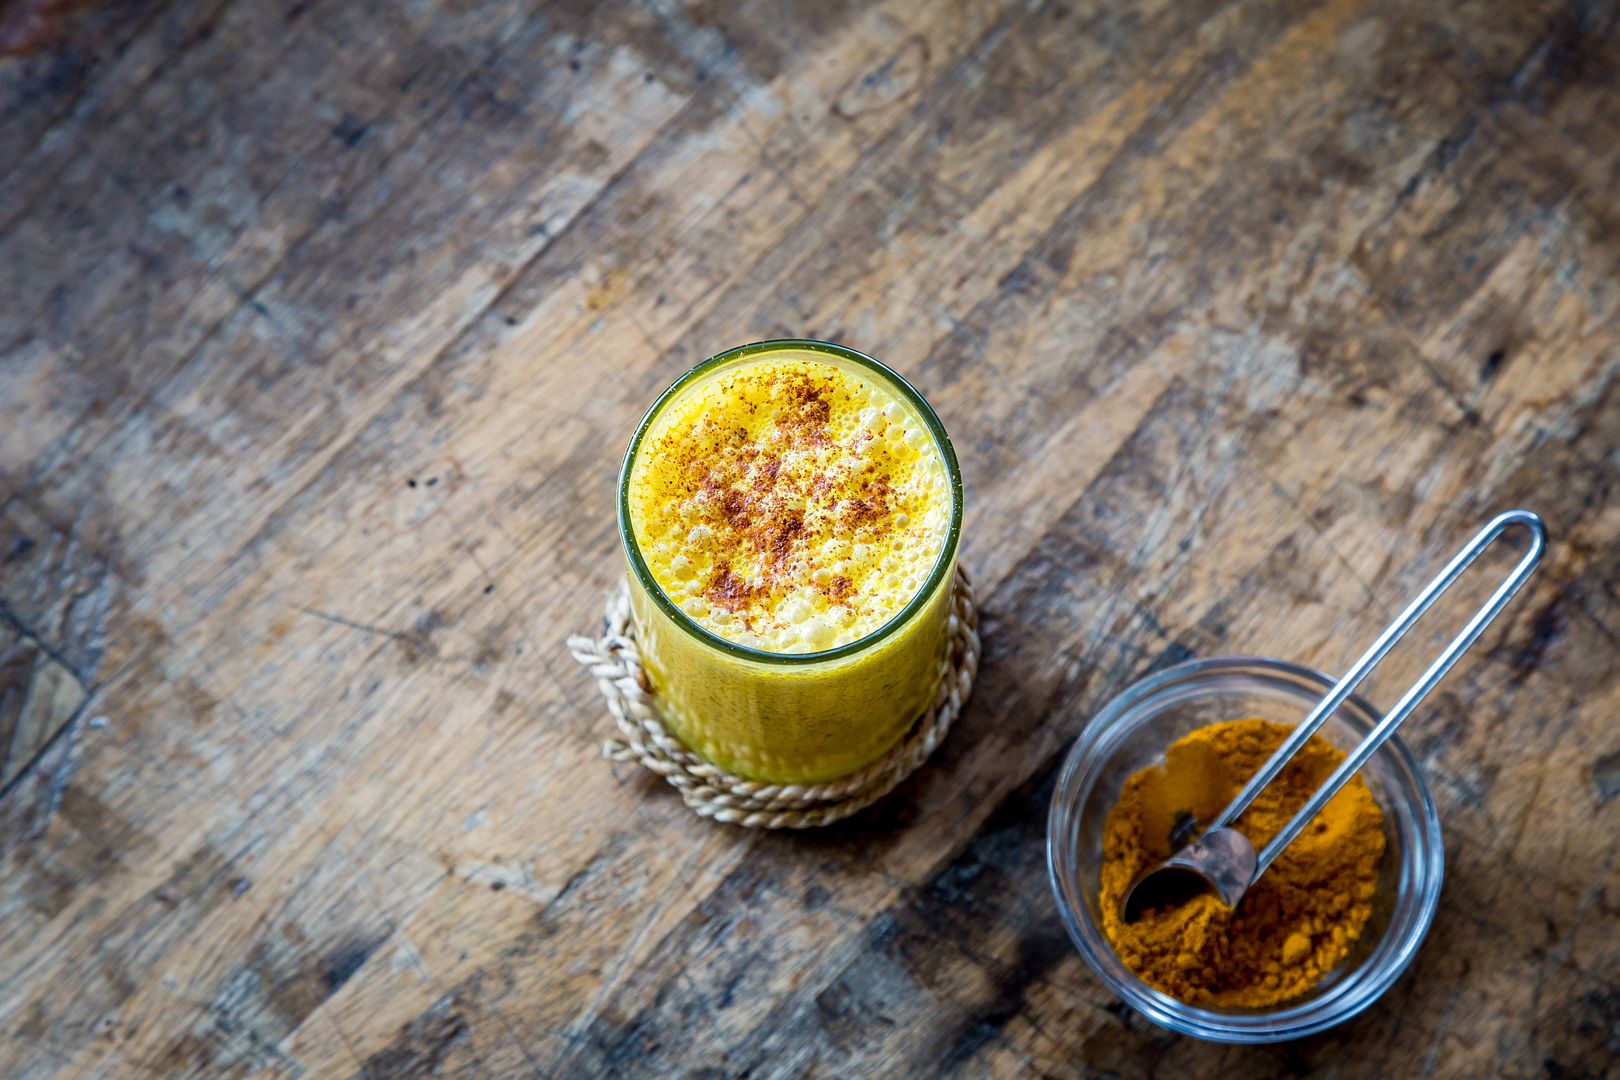 Healthy smoothie add ins to always have on hand that are also available at the supermarket: Get our full list, which includes powerful antioxidant-rich turmeric | Cool Mom Eats